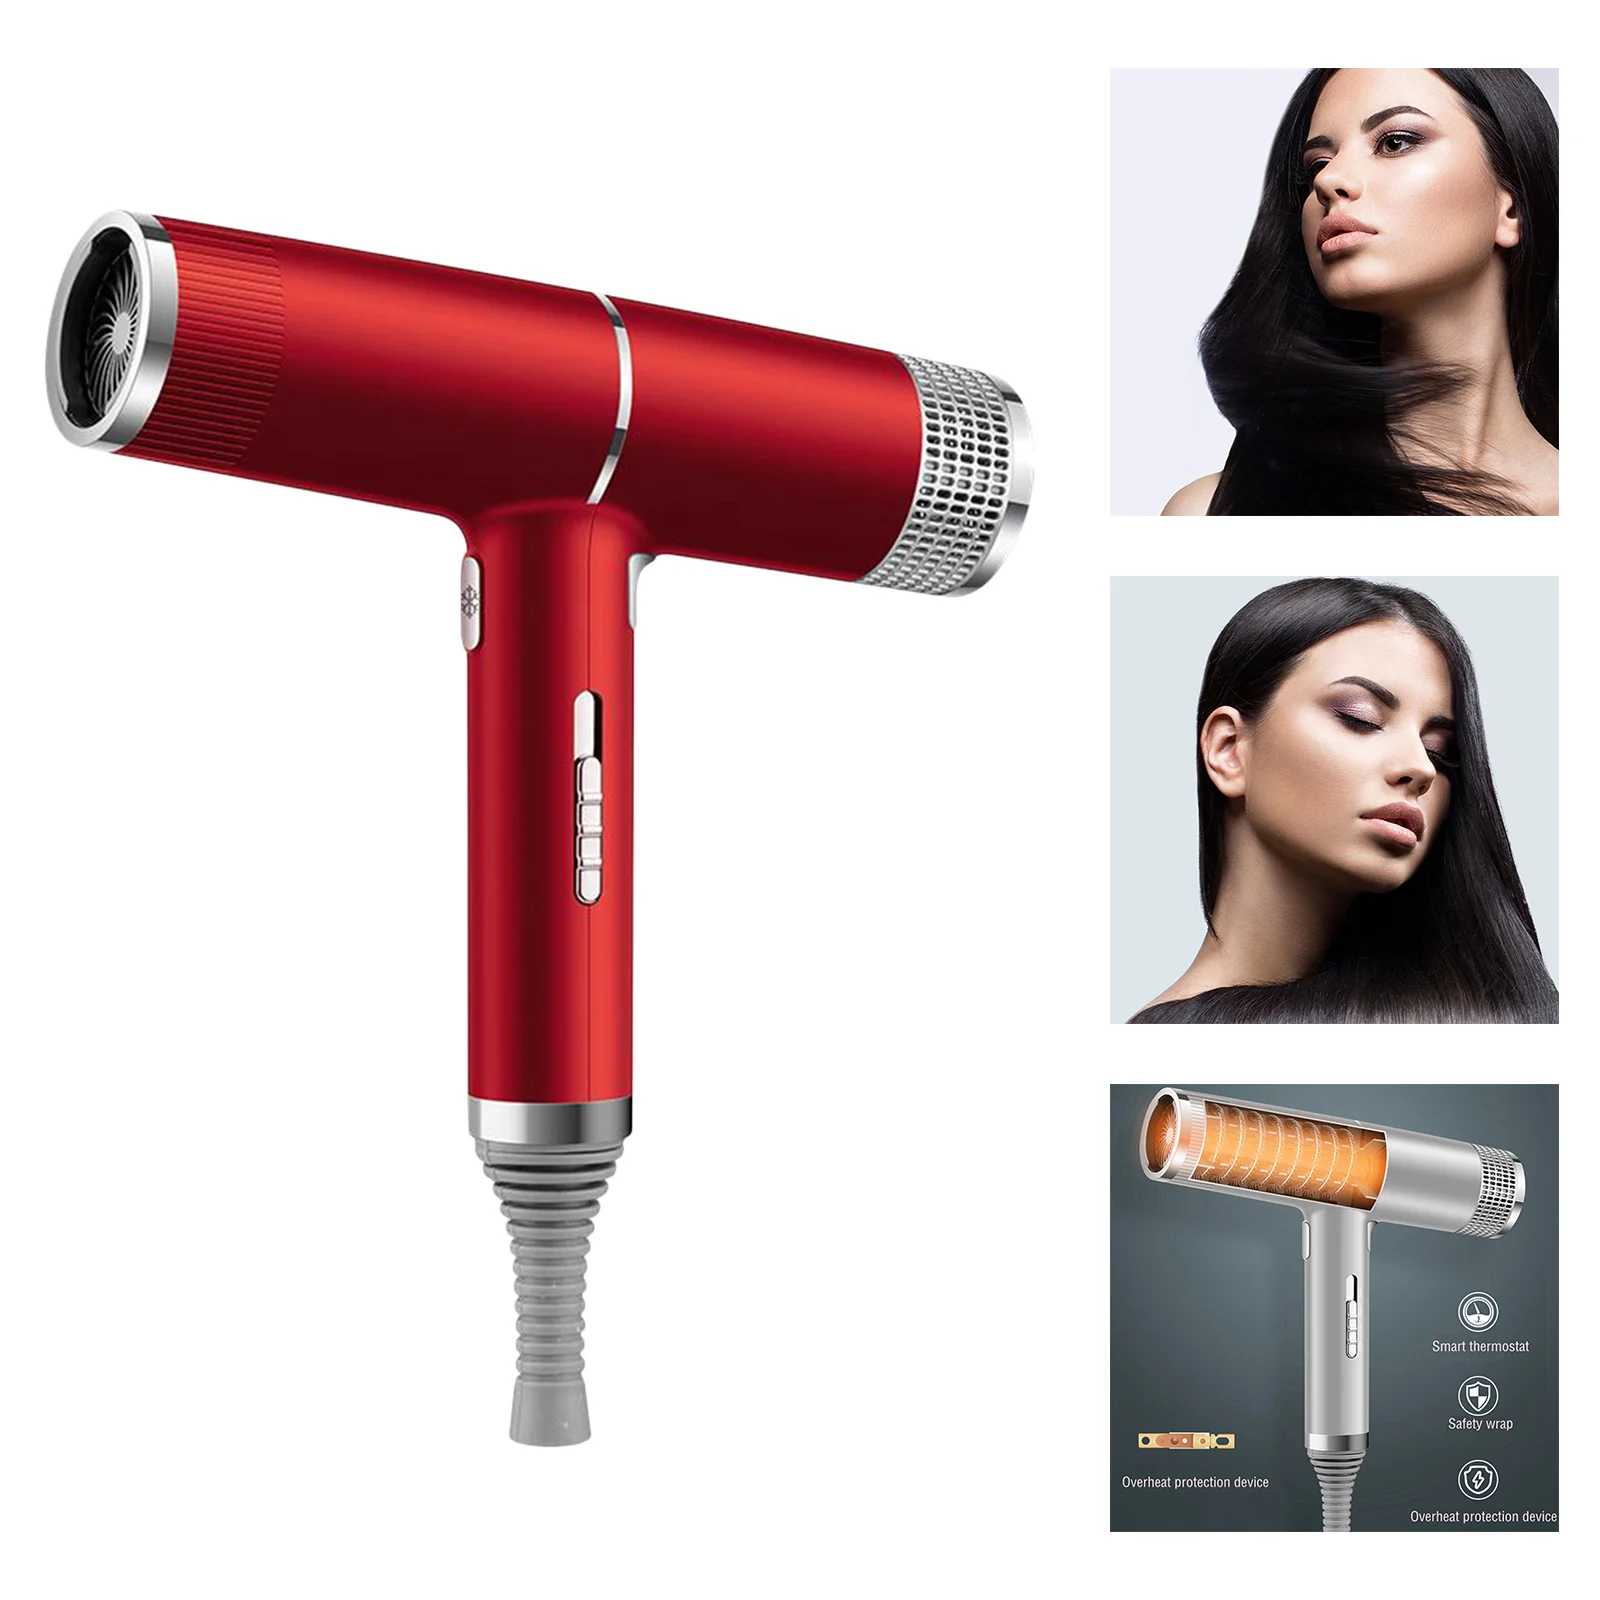 Professional Ionic Hair Dryer Hair Blower with Concentrator Diffuser Ion Hair Dryer High Speed Professional Blow Dryer